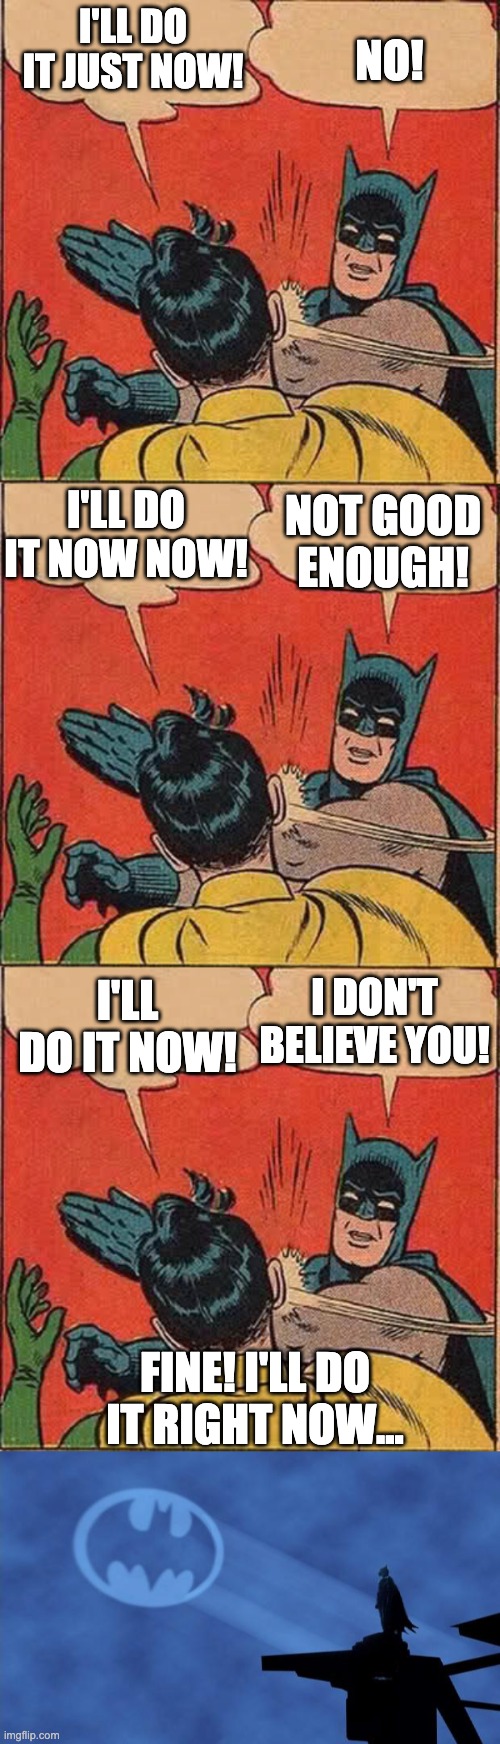 south african time explained | NO! I'LL DO IT JUST NOW! I'LL DO IT NOW NOW! NOT GOOD ENOUGH! I DON'T BELIEVE YOU! I'LL DO IT NOW! FINE! I'LL DO IT RIGHT NOW... | image tagged in memes,batman slapping robin,bat signal,south africa,south african time | made w/ Imgflip meme maker